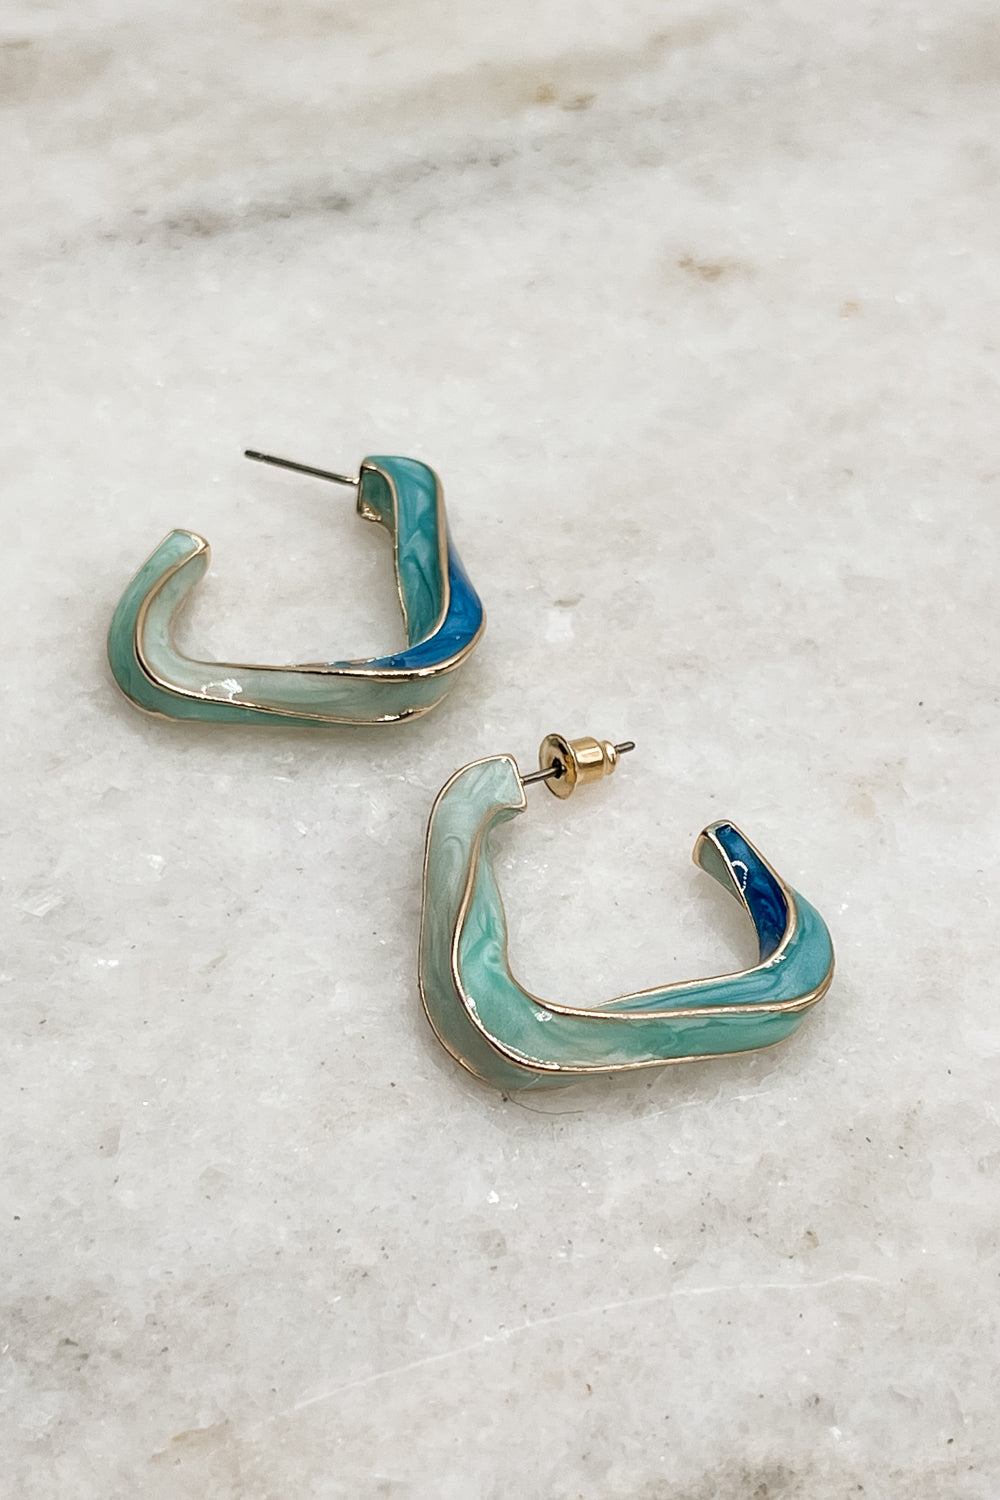 The Greyson Earrings are shown. They are gold and blue twisted hoops in a geometric shape.